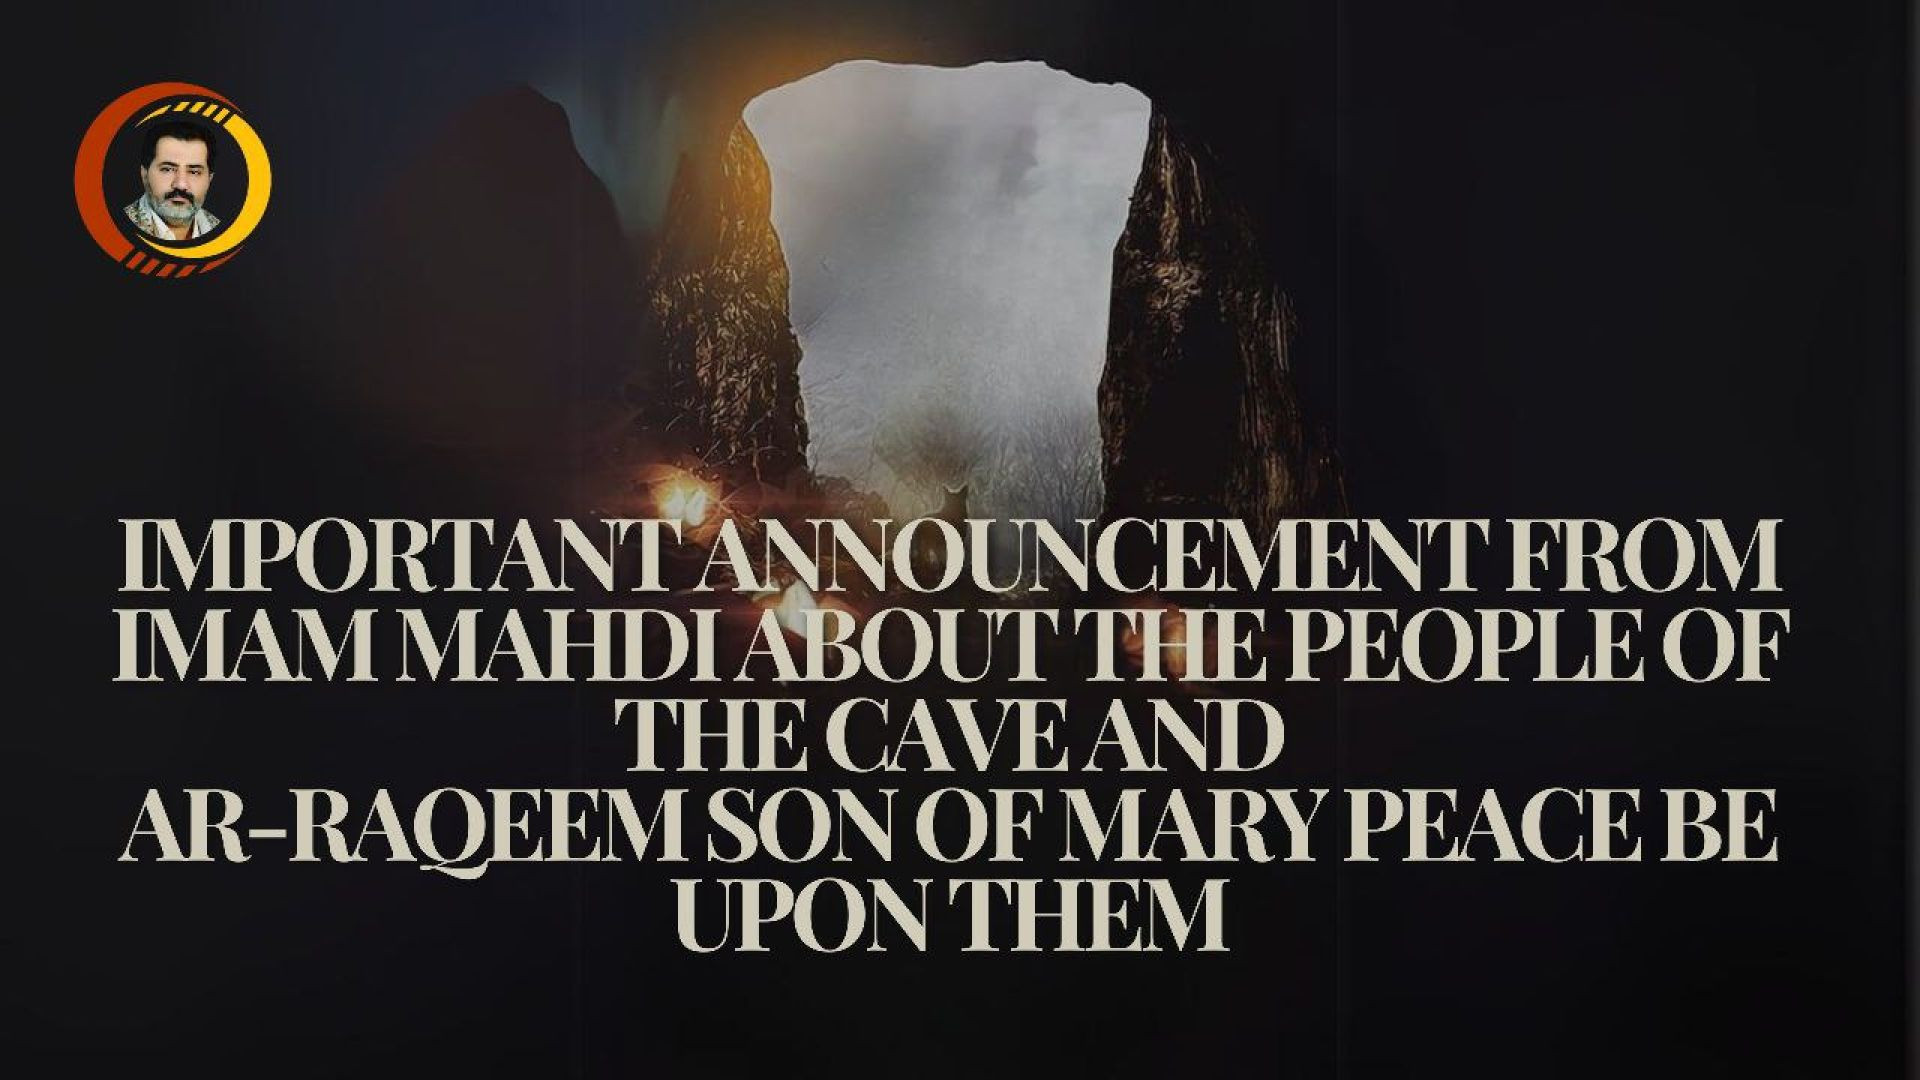 An important announcement from Imam Mahdi in regard people of the Cave and Al-Raqeem son of Mary